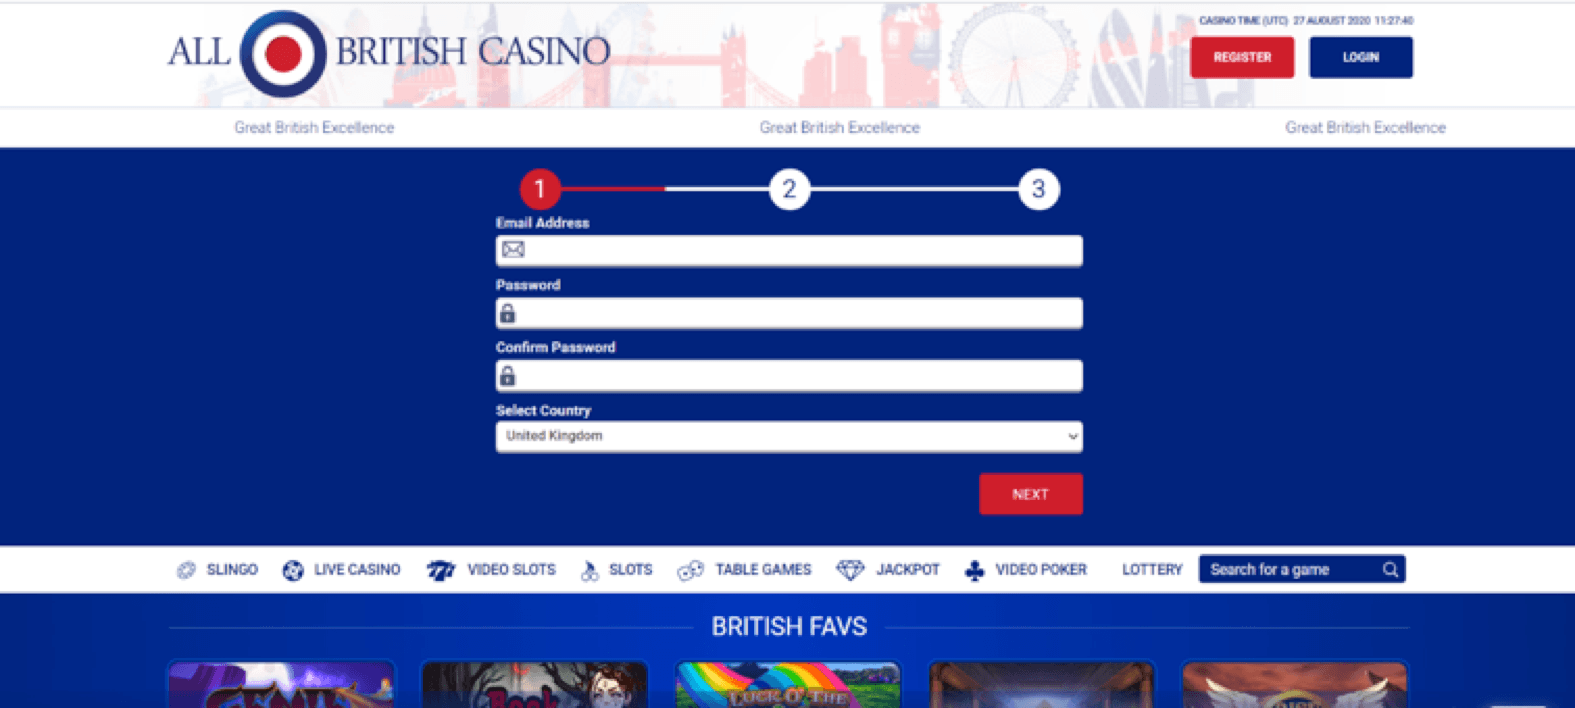 User interface review for All British Casino